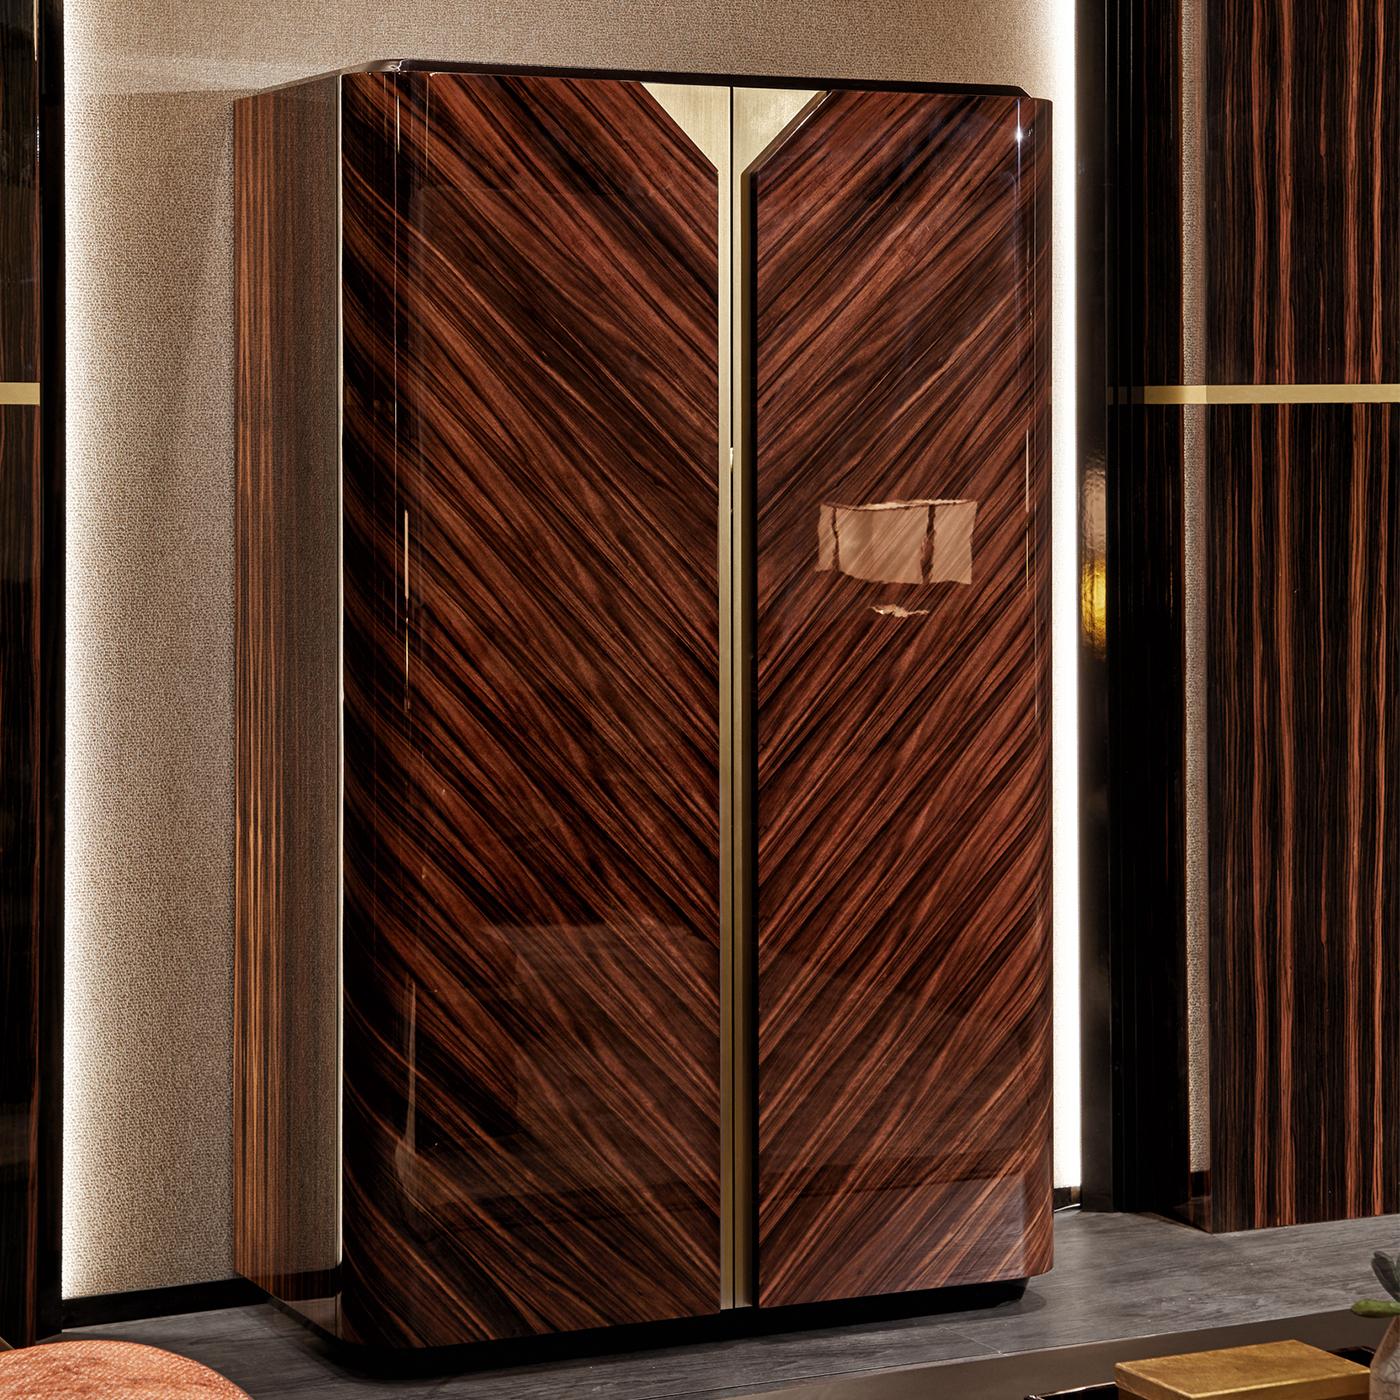 Natural beauty is the central element of the Chandler Cabinet, designed for warm, contemporary living spaces. Crafted in wood, the cabinet features Macassar ebony veneer carefully positioned to create a chevron design, exalted by a glossy finish.